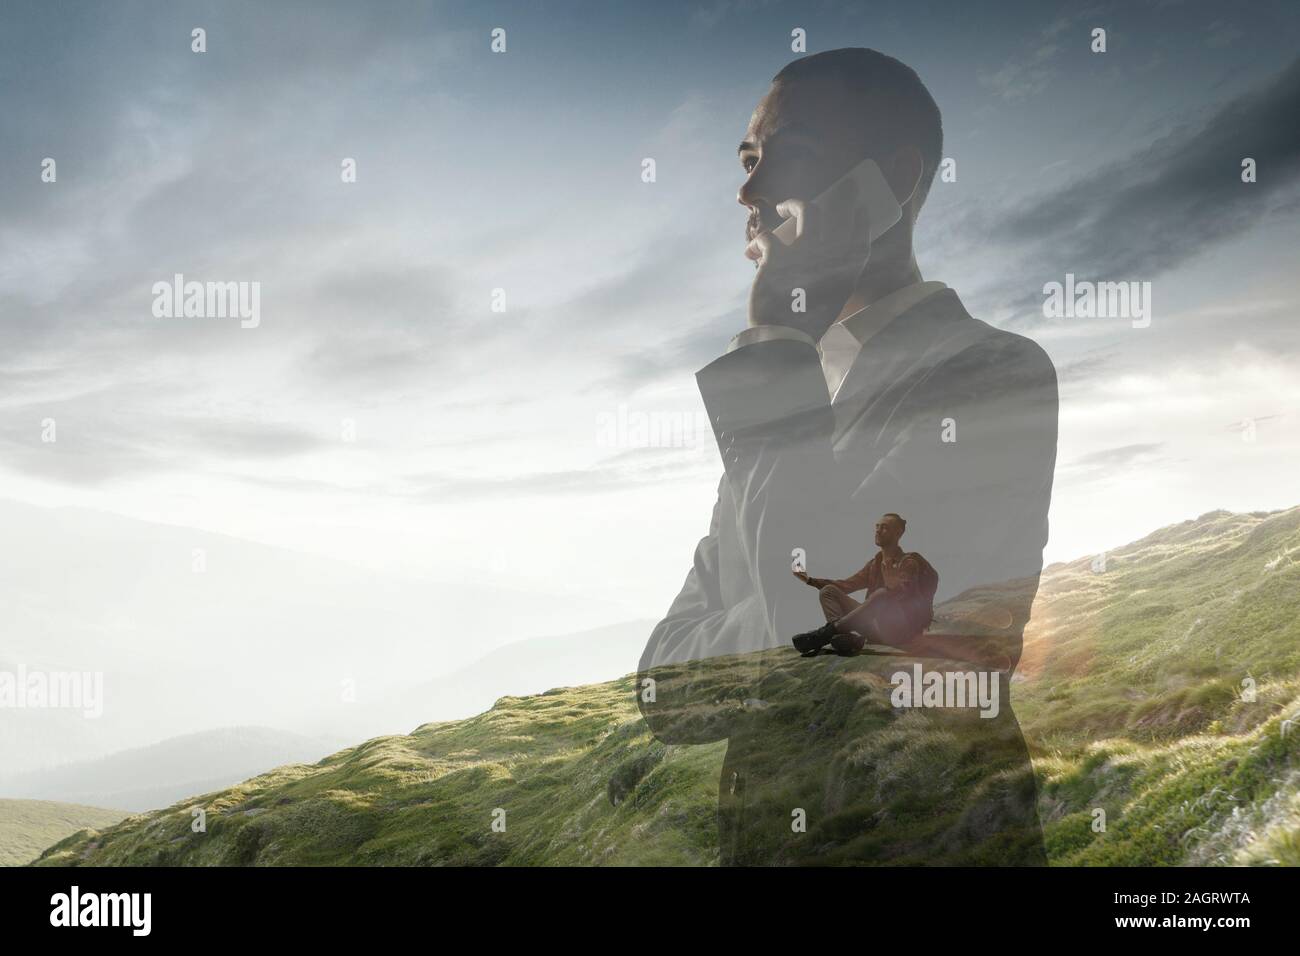 Busy. Businessman with landscapes on background, double exposure. Lives in megapolis but needs to find herself face to face with nature. Dreams about mental balance. Psycology, eco concept. Stock Photo